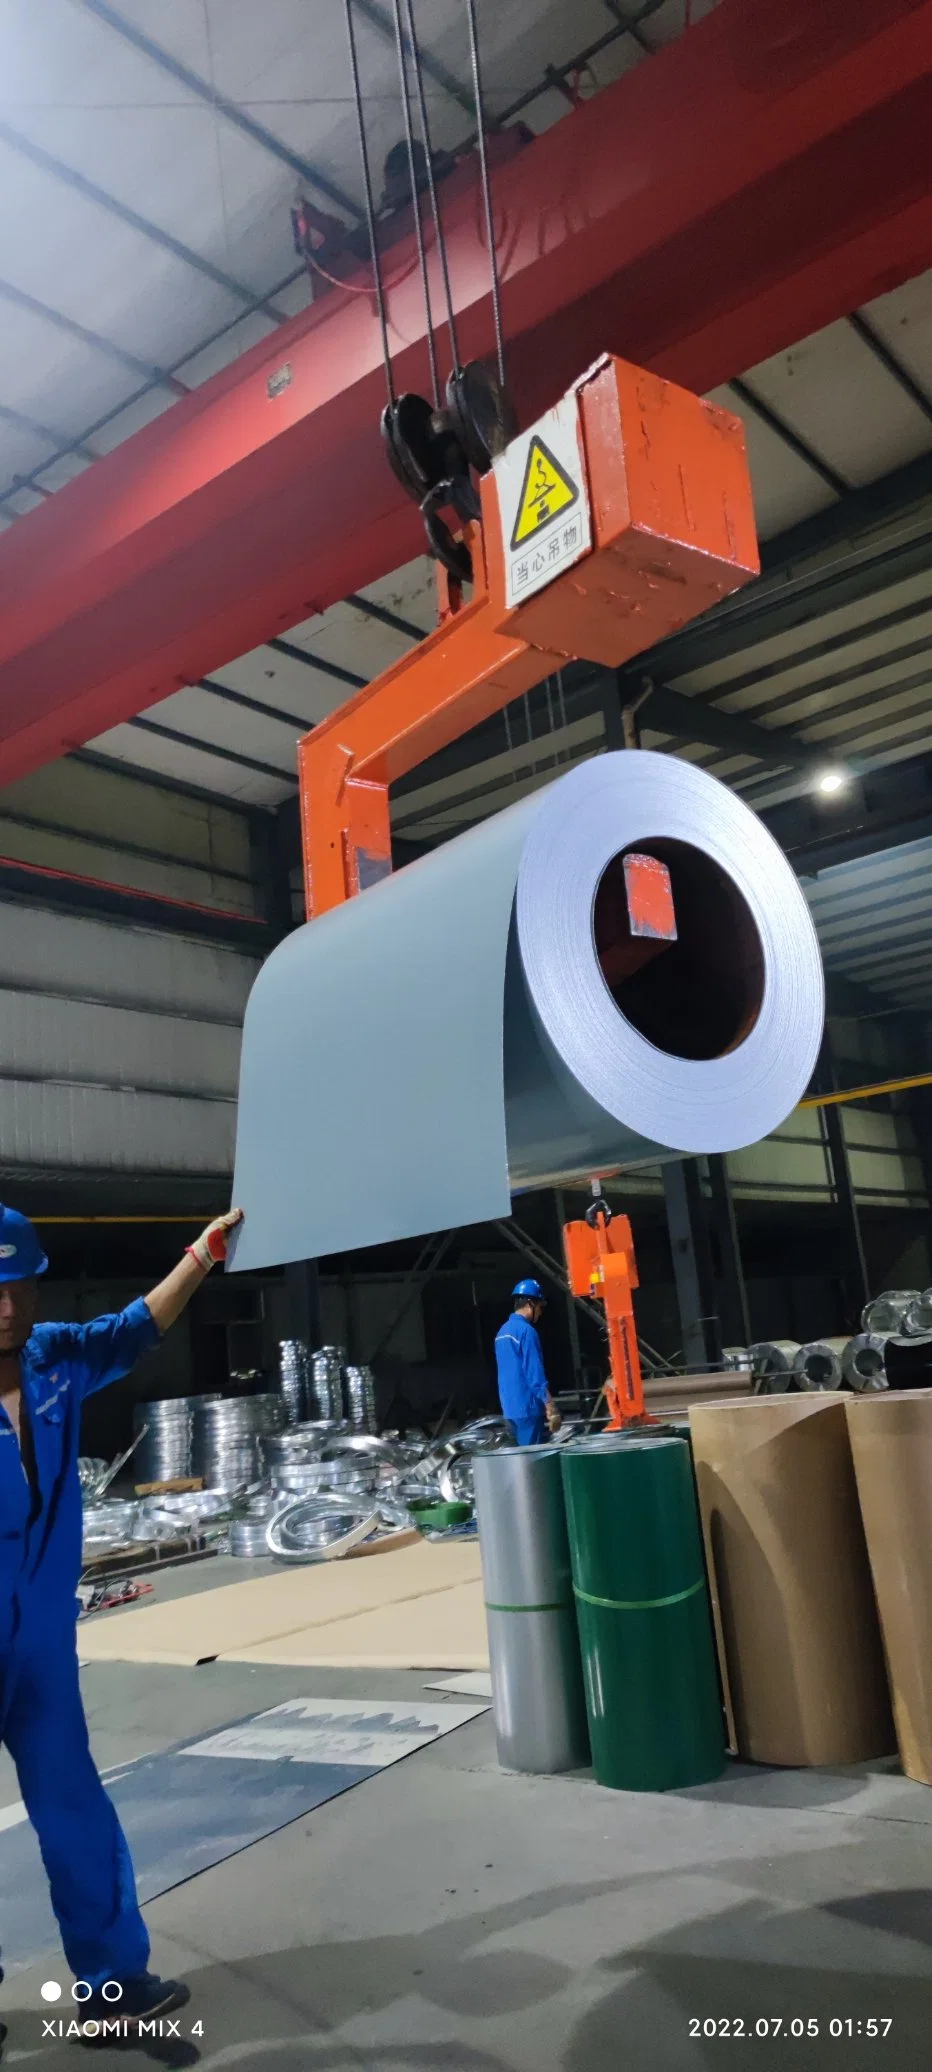 Steel Sheet Roll Dx51d China Steel Factory Cold Dipped Galvanized Steel Coil / Hot Rolled Steel Coil / Gi Coil Price